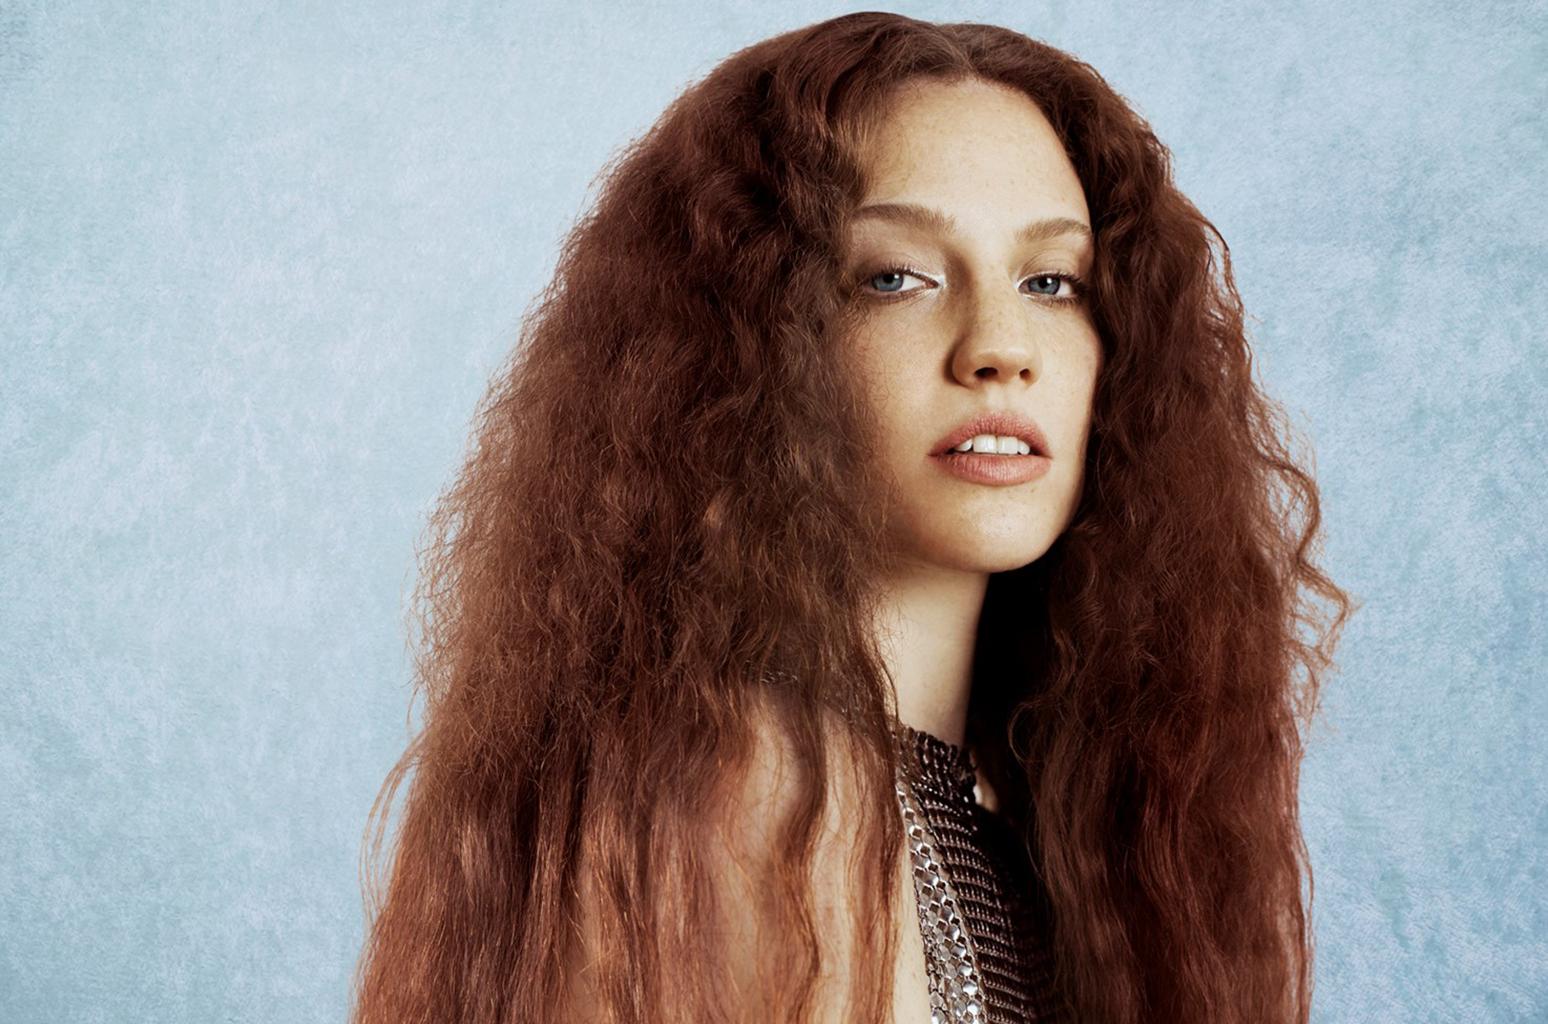 Jess Glynne Opens Up About New Album, Working With Ed